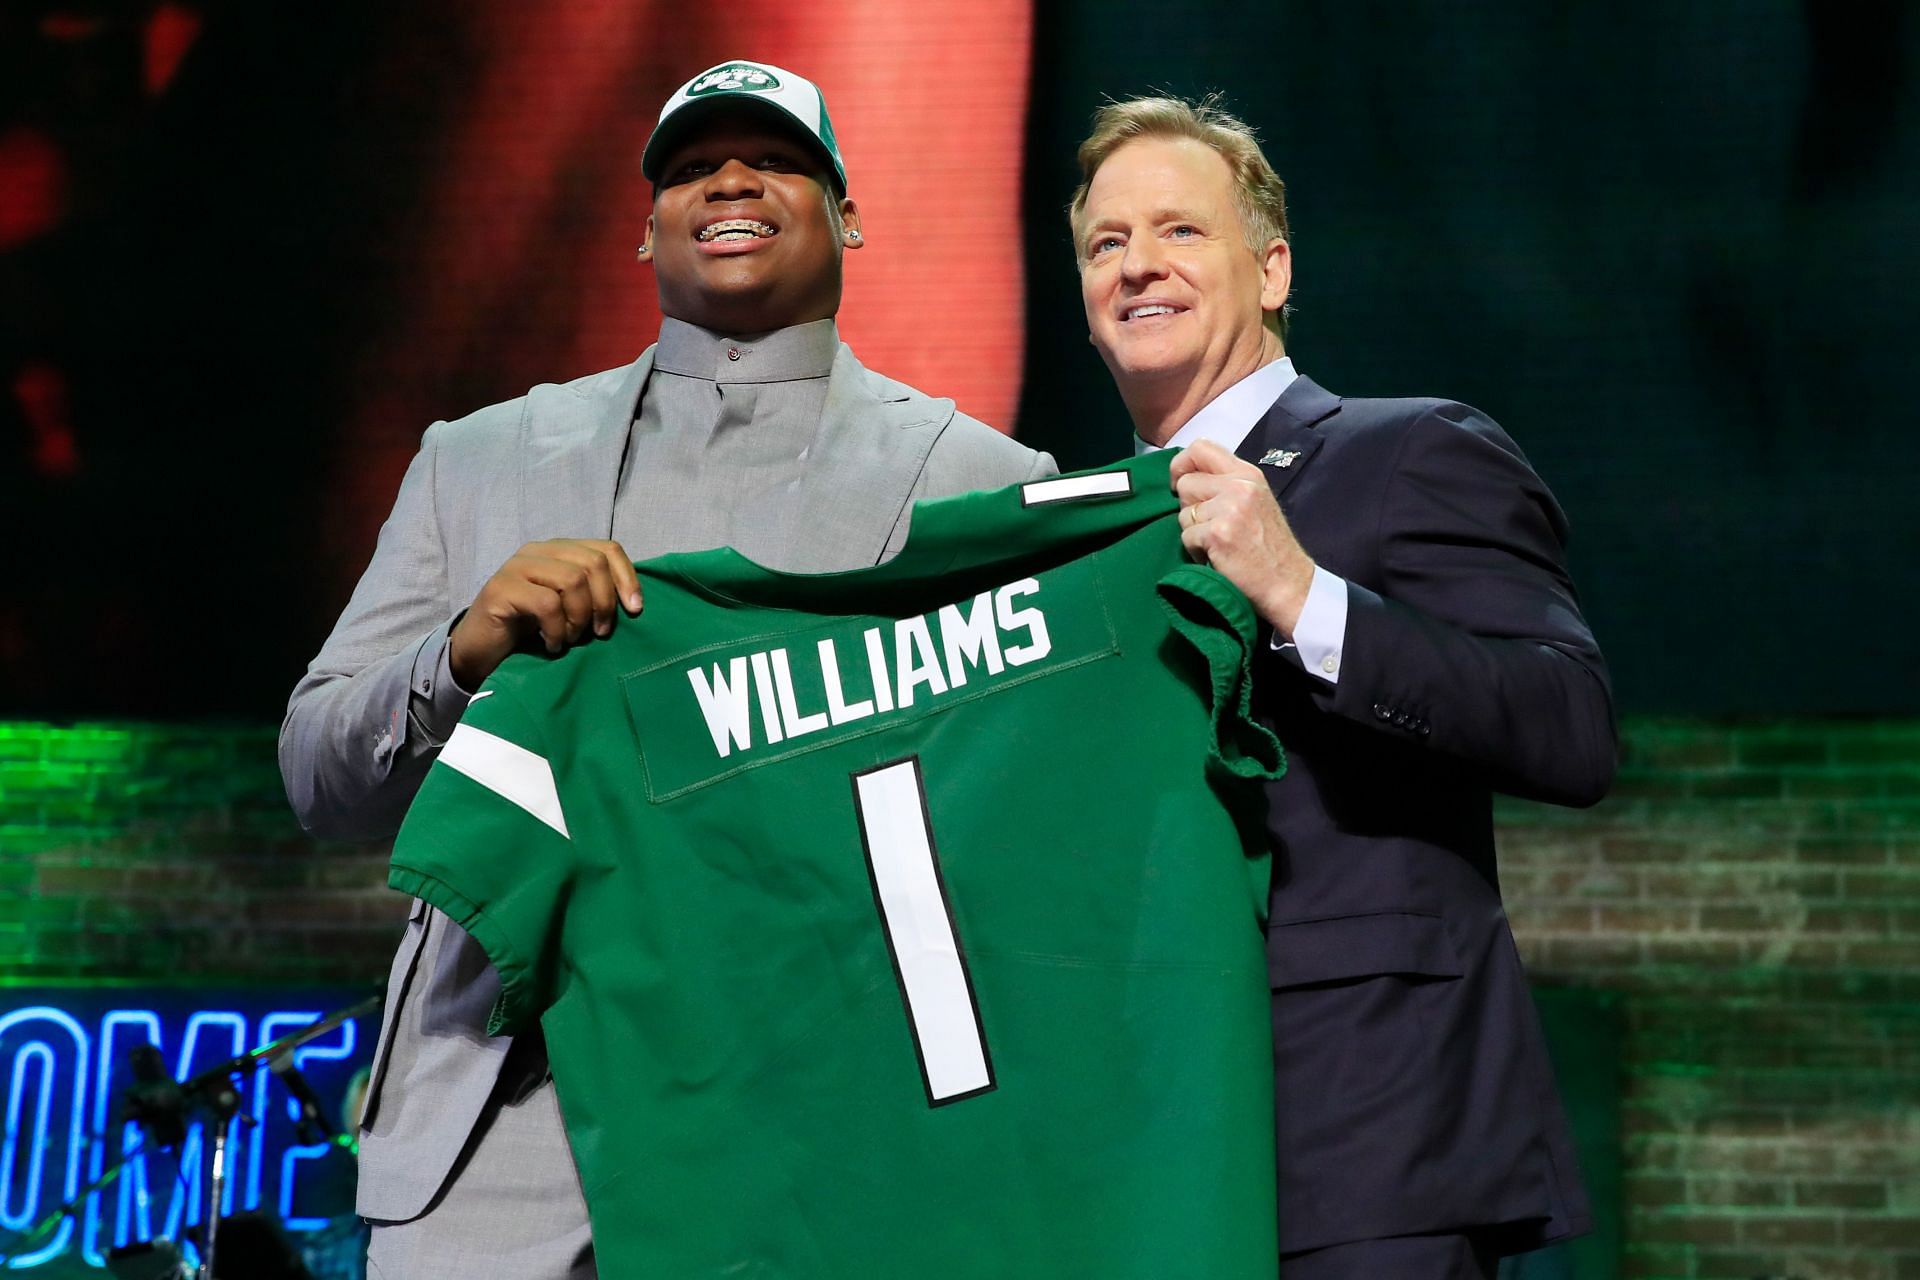 Quinnen Williams was selected third overall in the NFL Draft